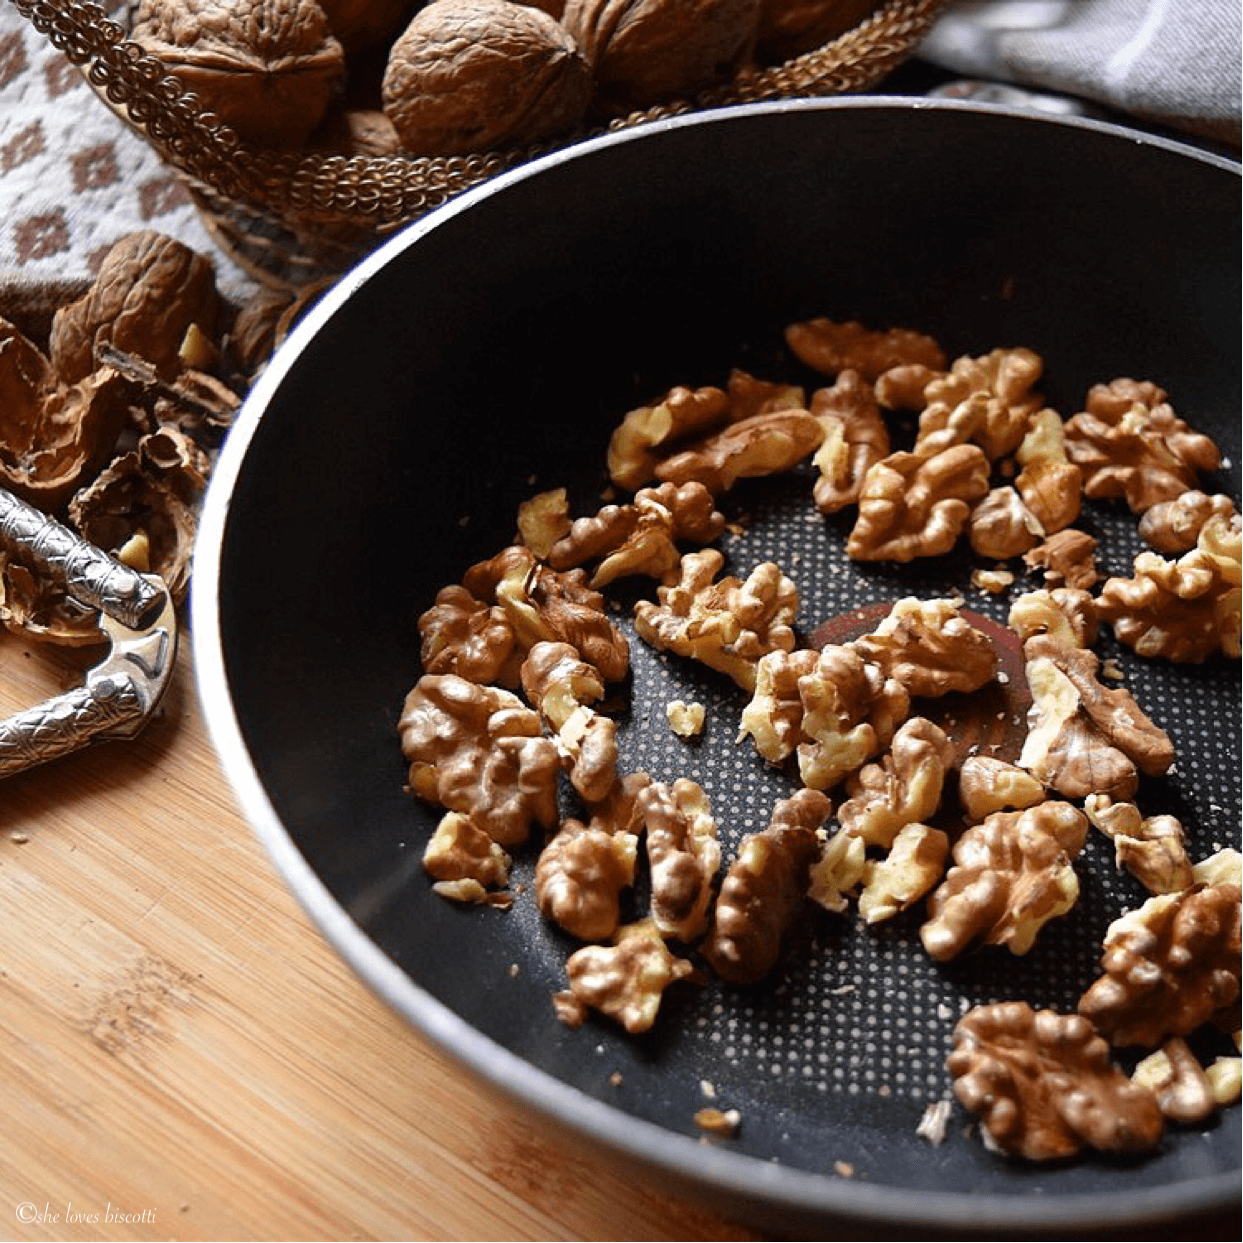 Toasting the walnuts in a small pan.